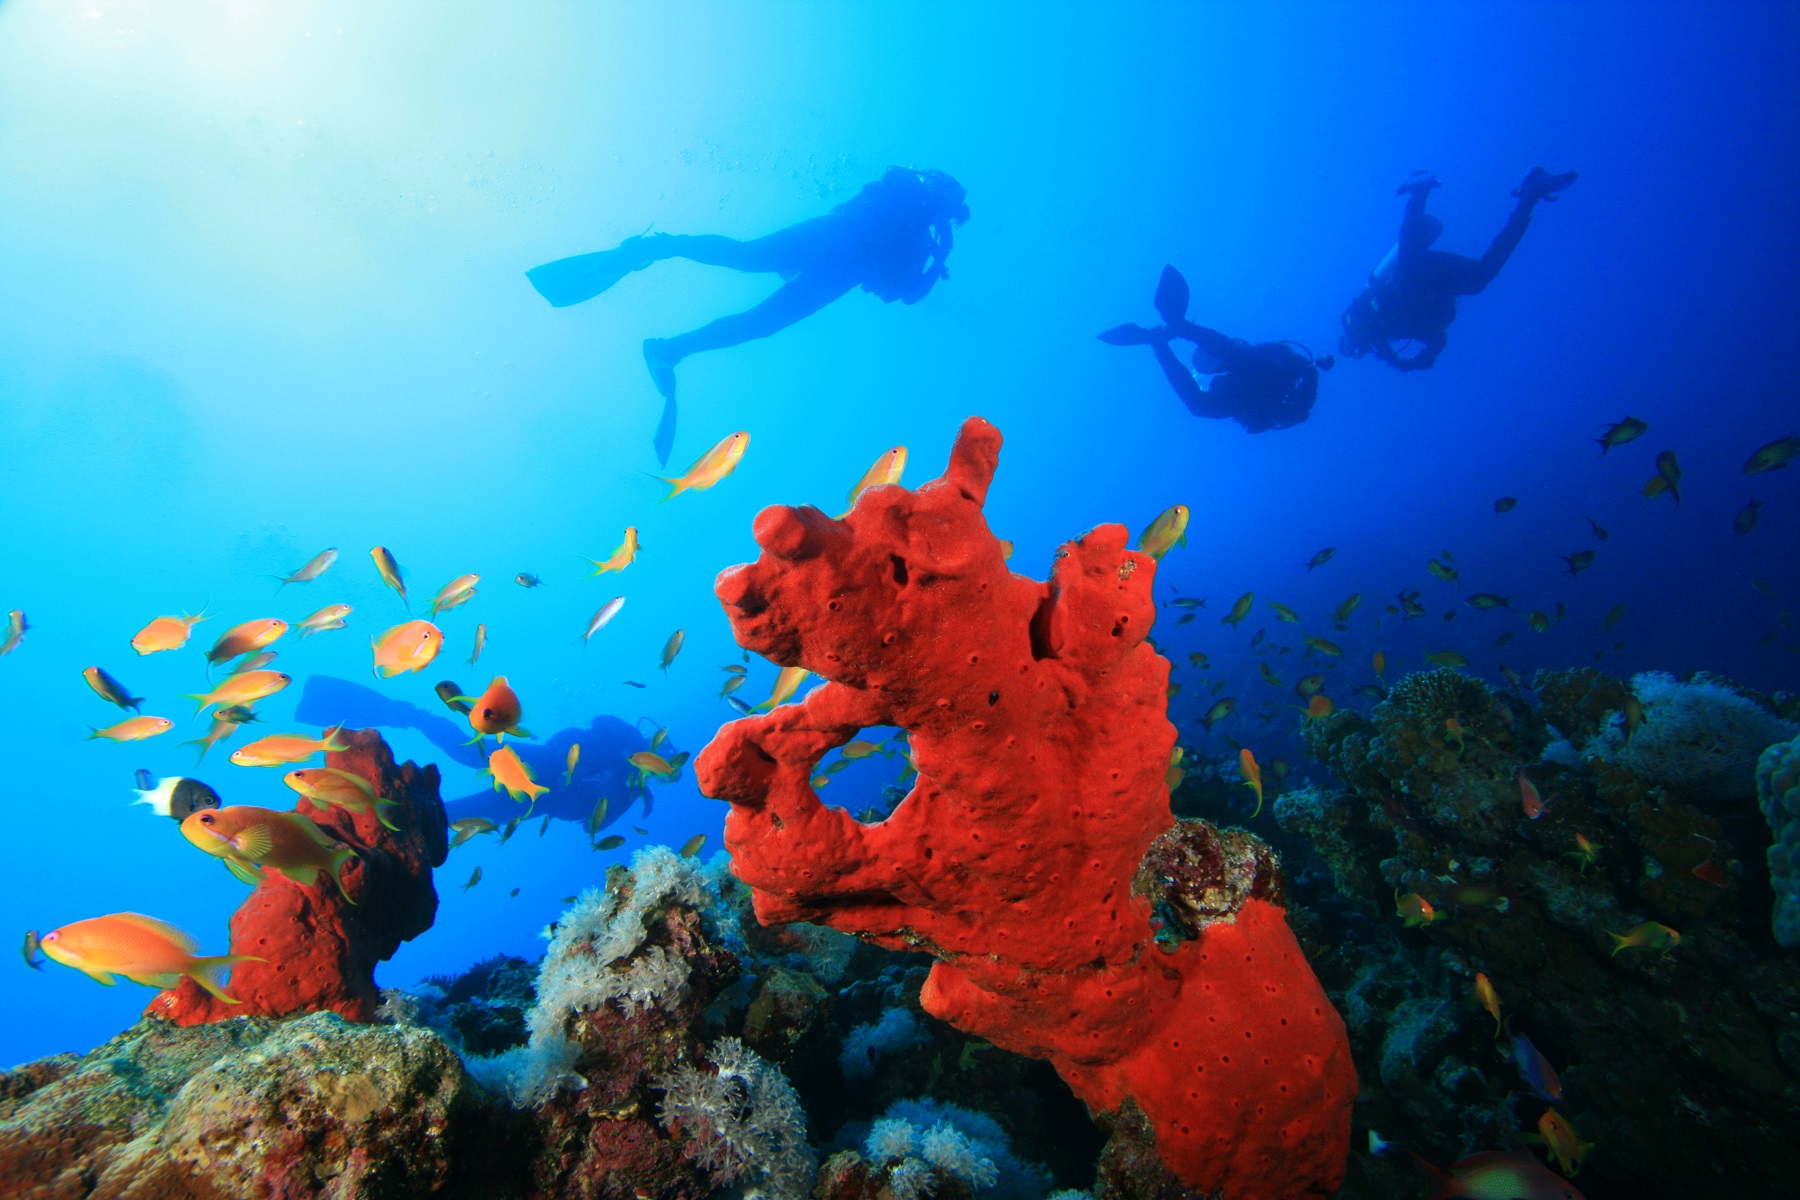 coral-reef-sponges-and-scuba-divers-in-the-red-sea-shutterstock-103369655.jpg